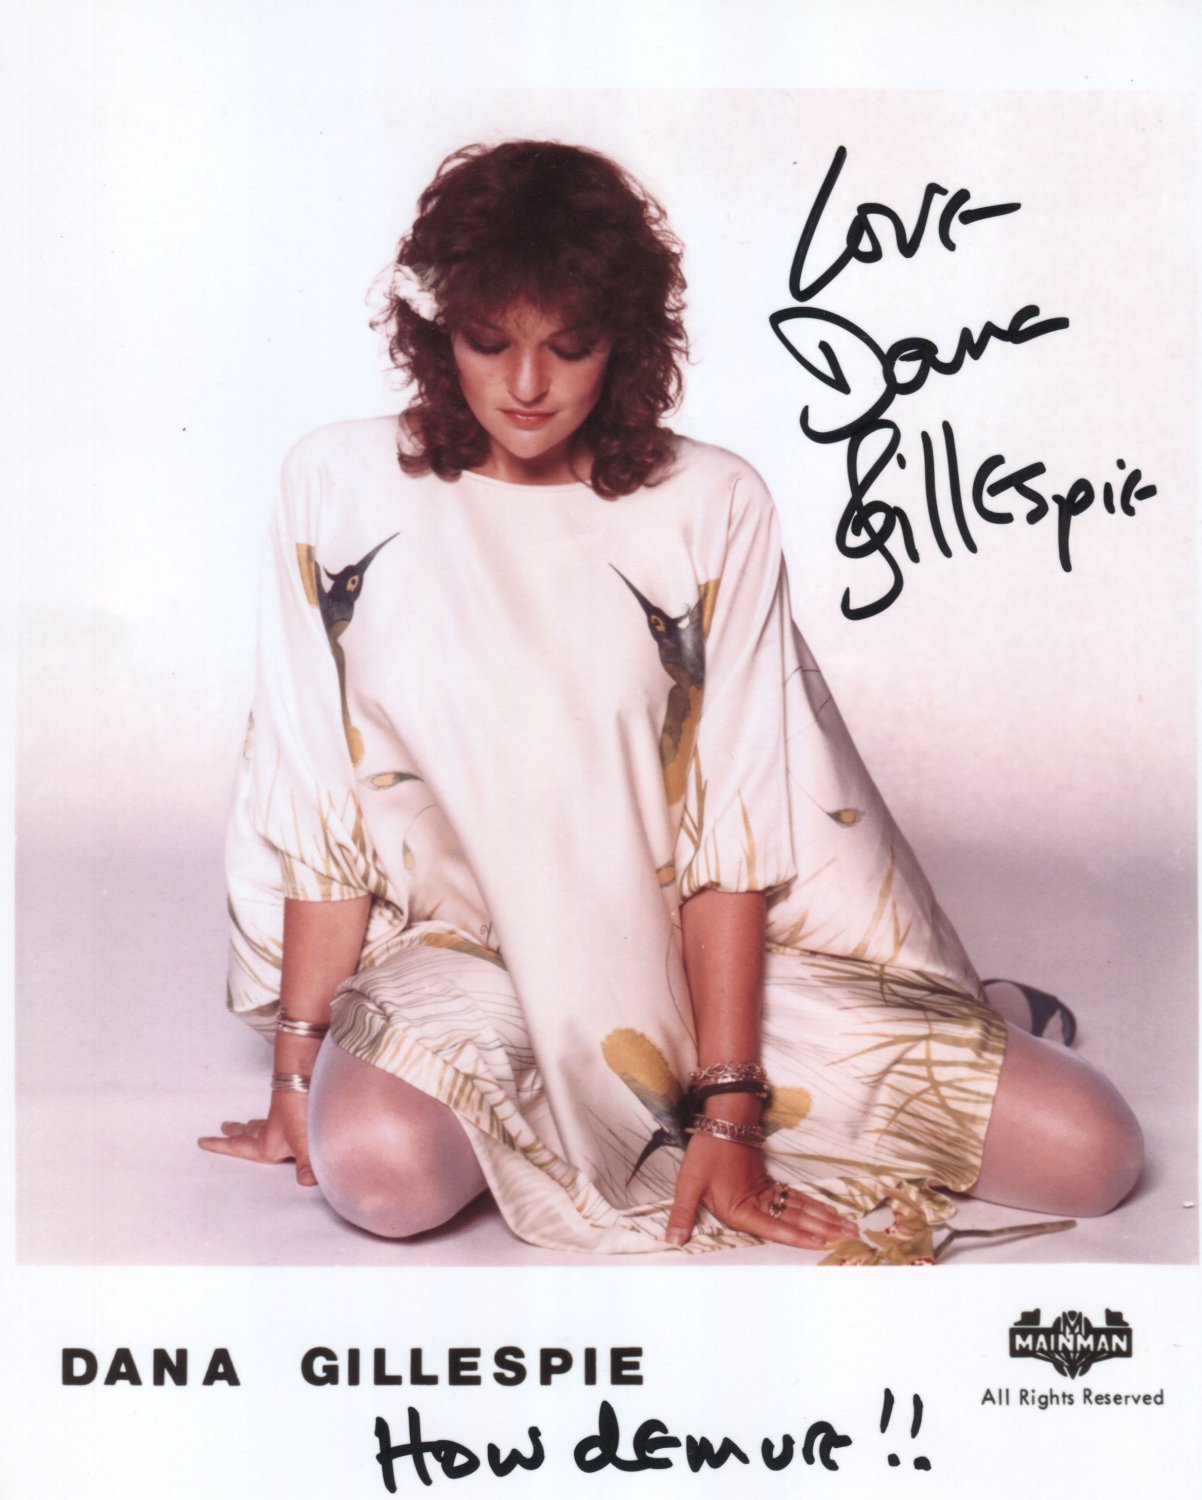 Dana Gillespie SIGNED 8" x 10" Photo + Certificate Of Authentication  100% Genuine